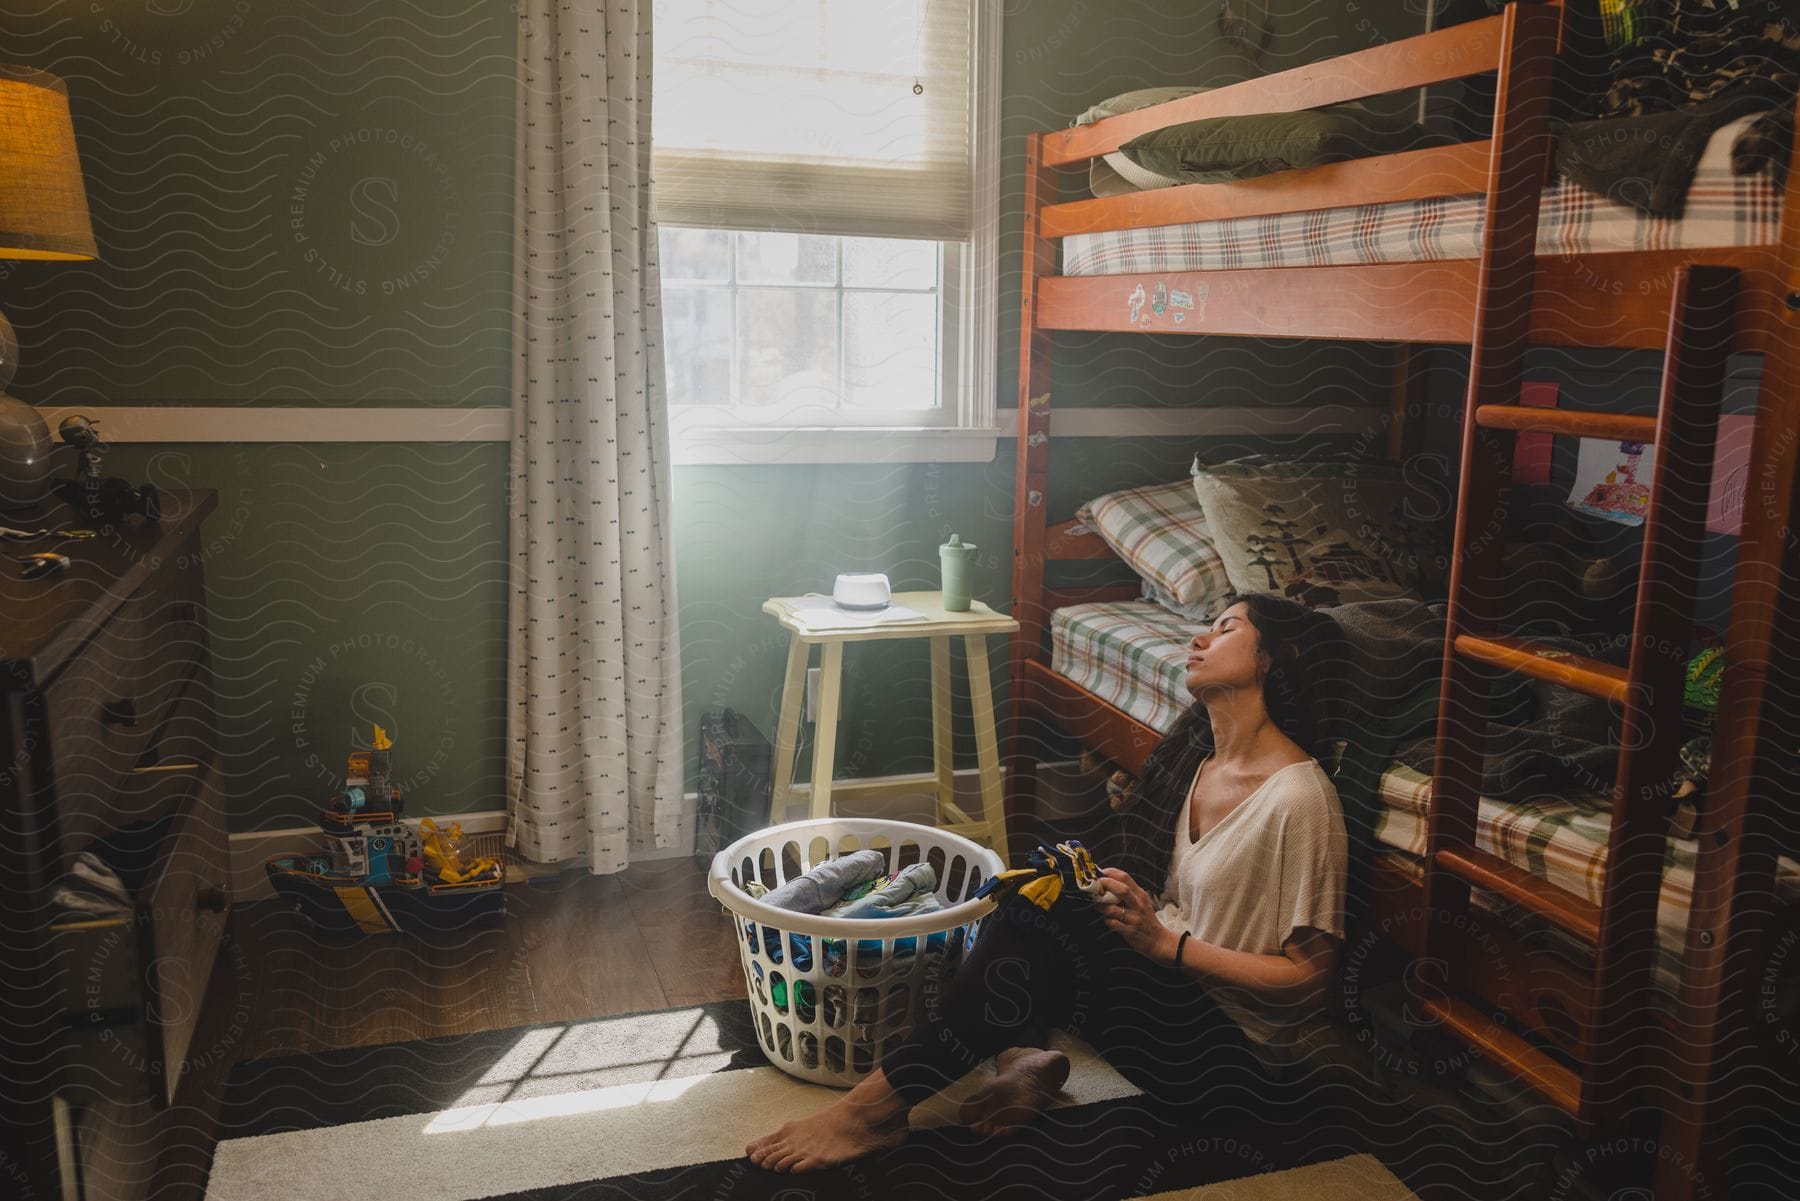 Young woman folding laundry on the floor of the bedroom during the day